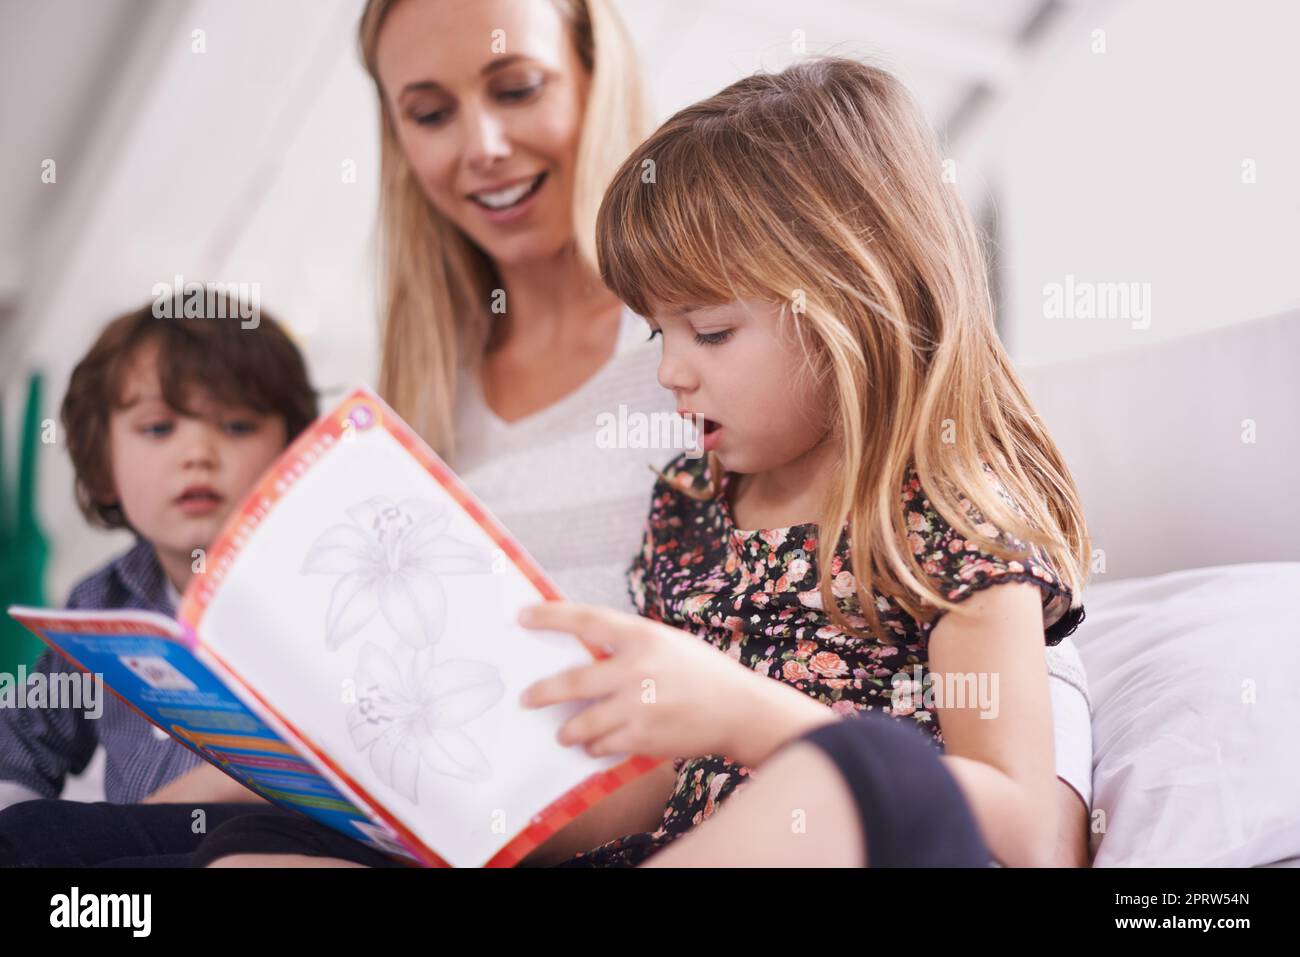 Family story time. a mother reading with her children at home. Stock Photo